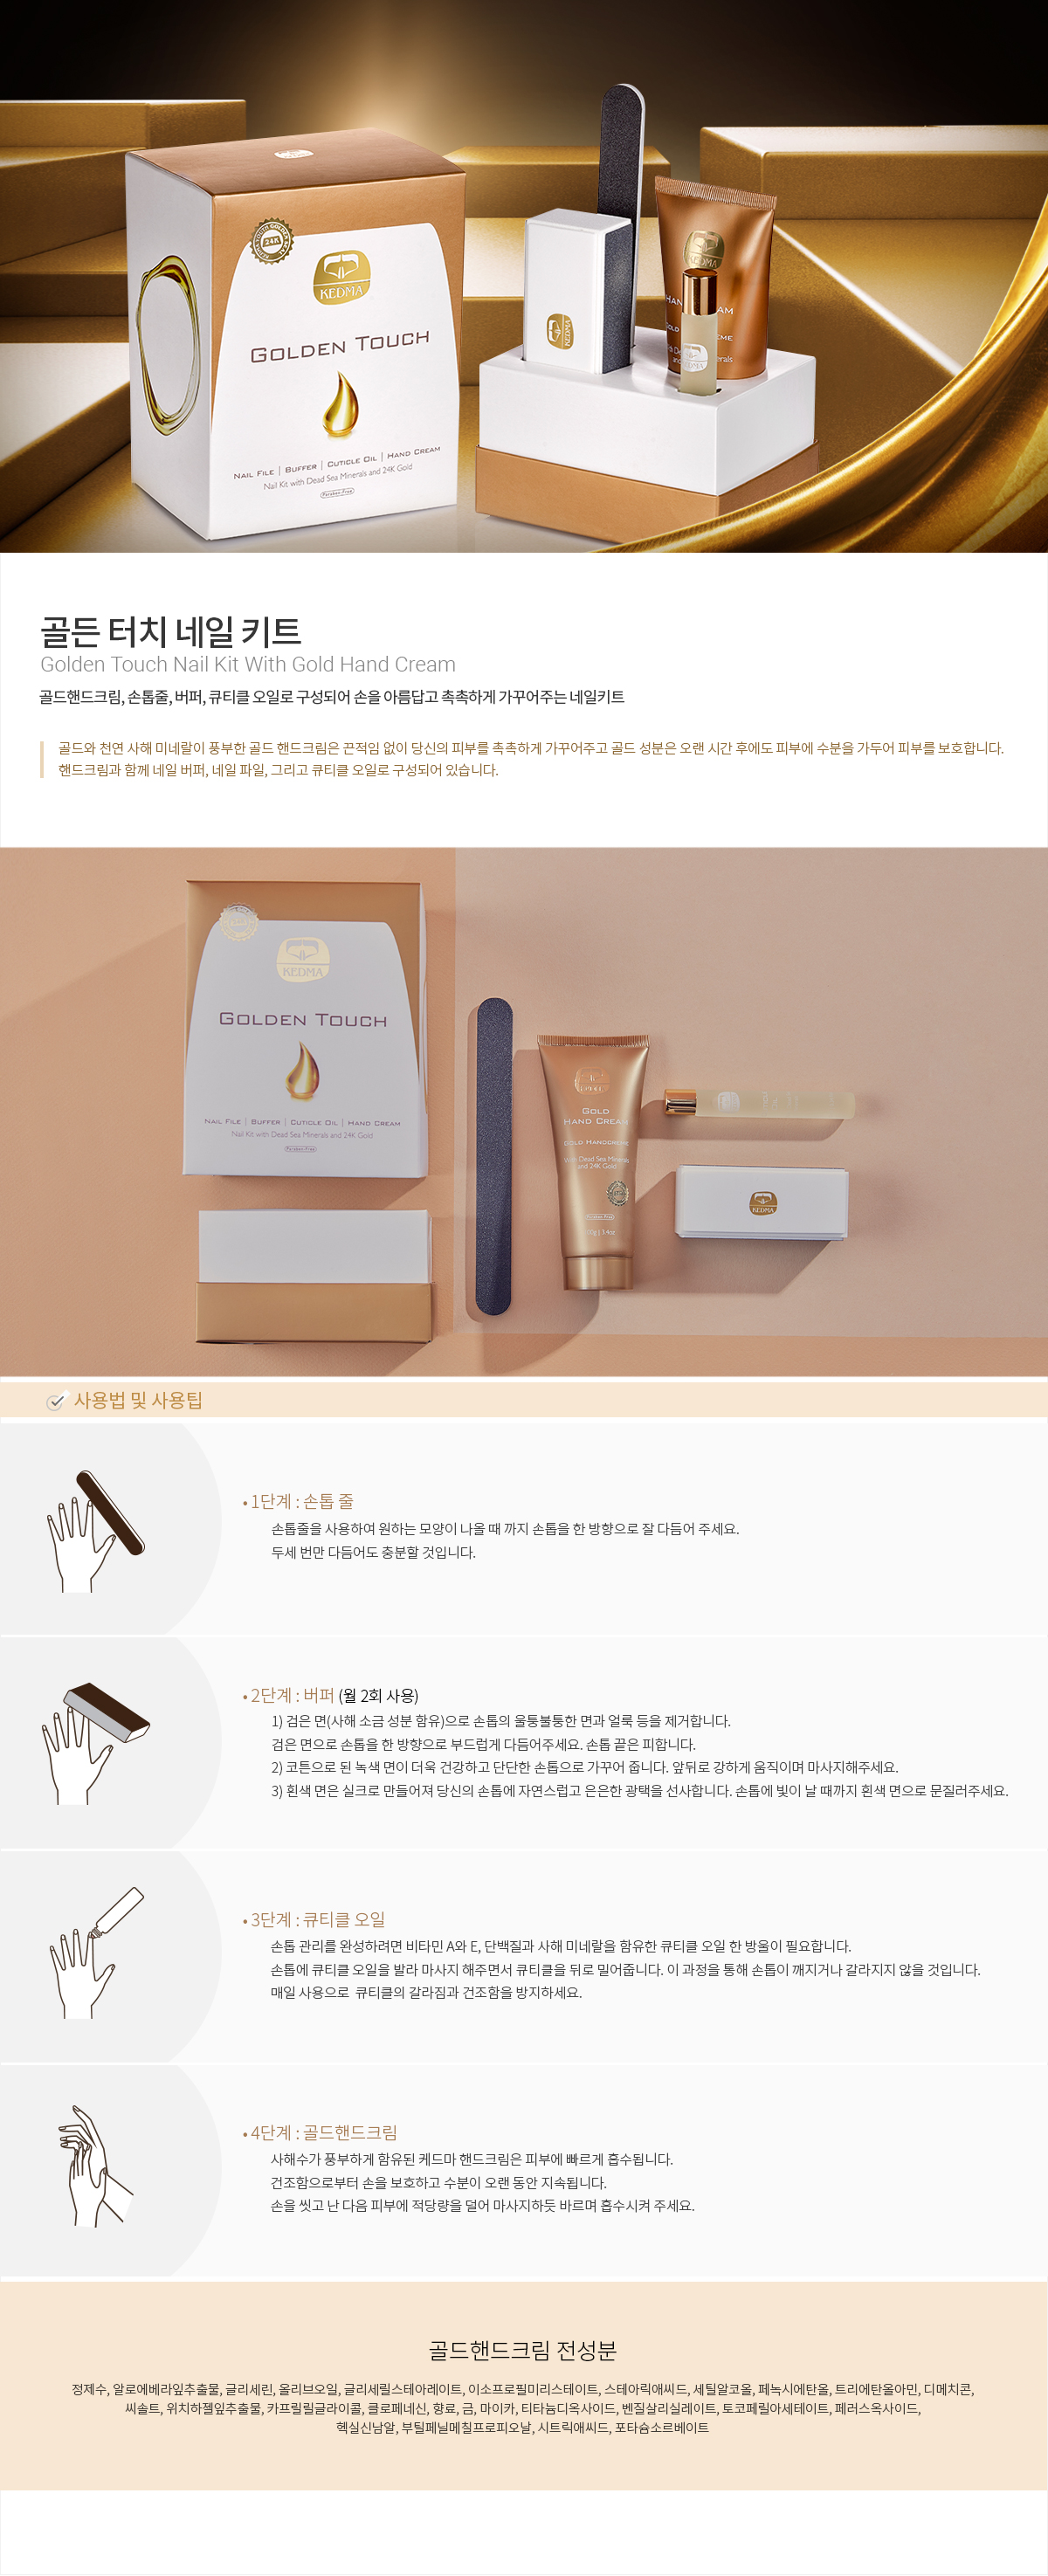 kedma_Golden-Touch-Nail-Kit-With-Gold-Hand-Cream.jpg